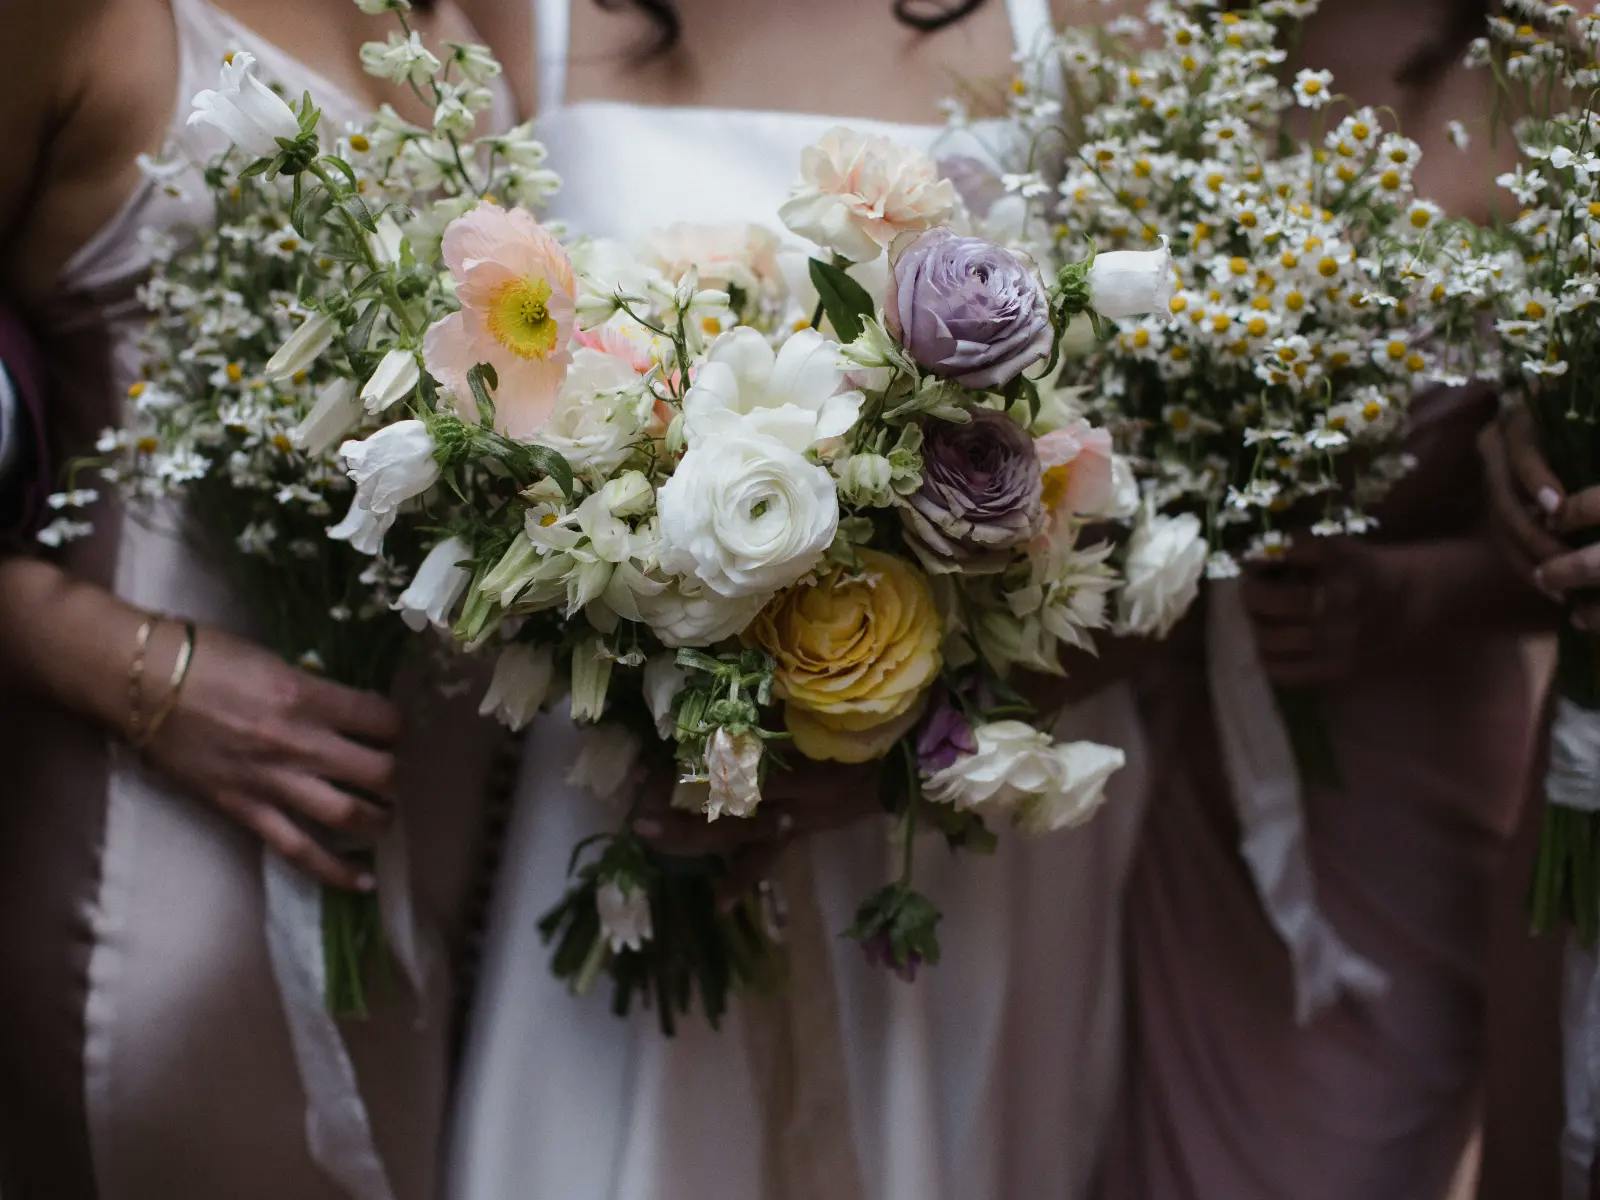 Bride and bridesmaids hold bouquets together